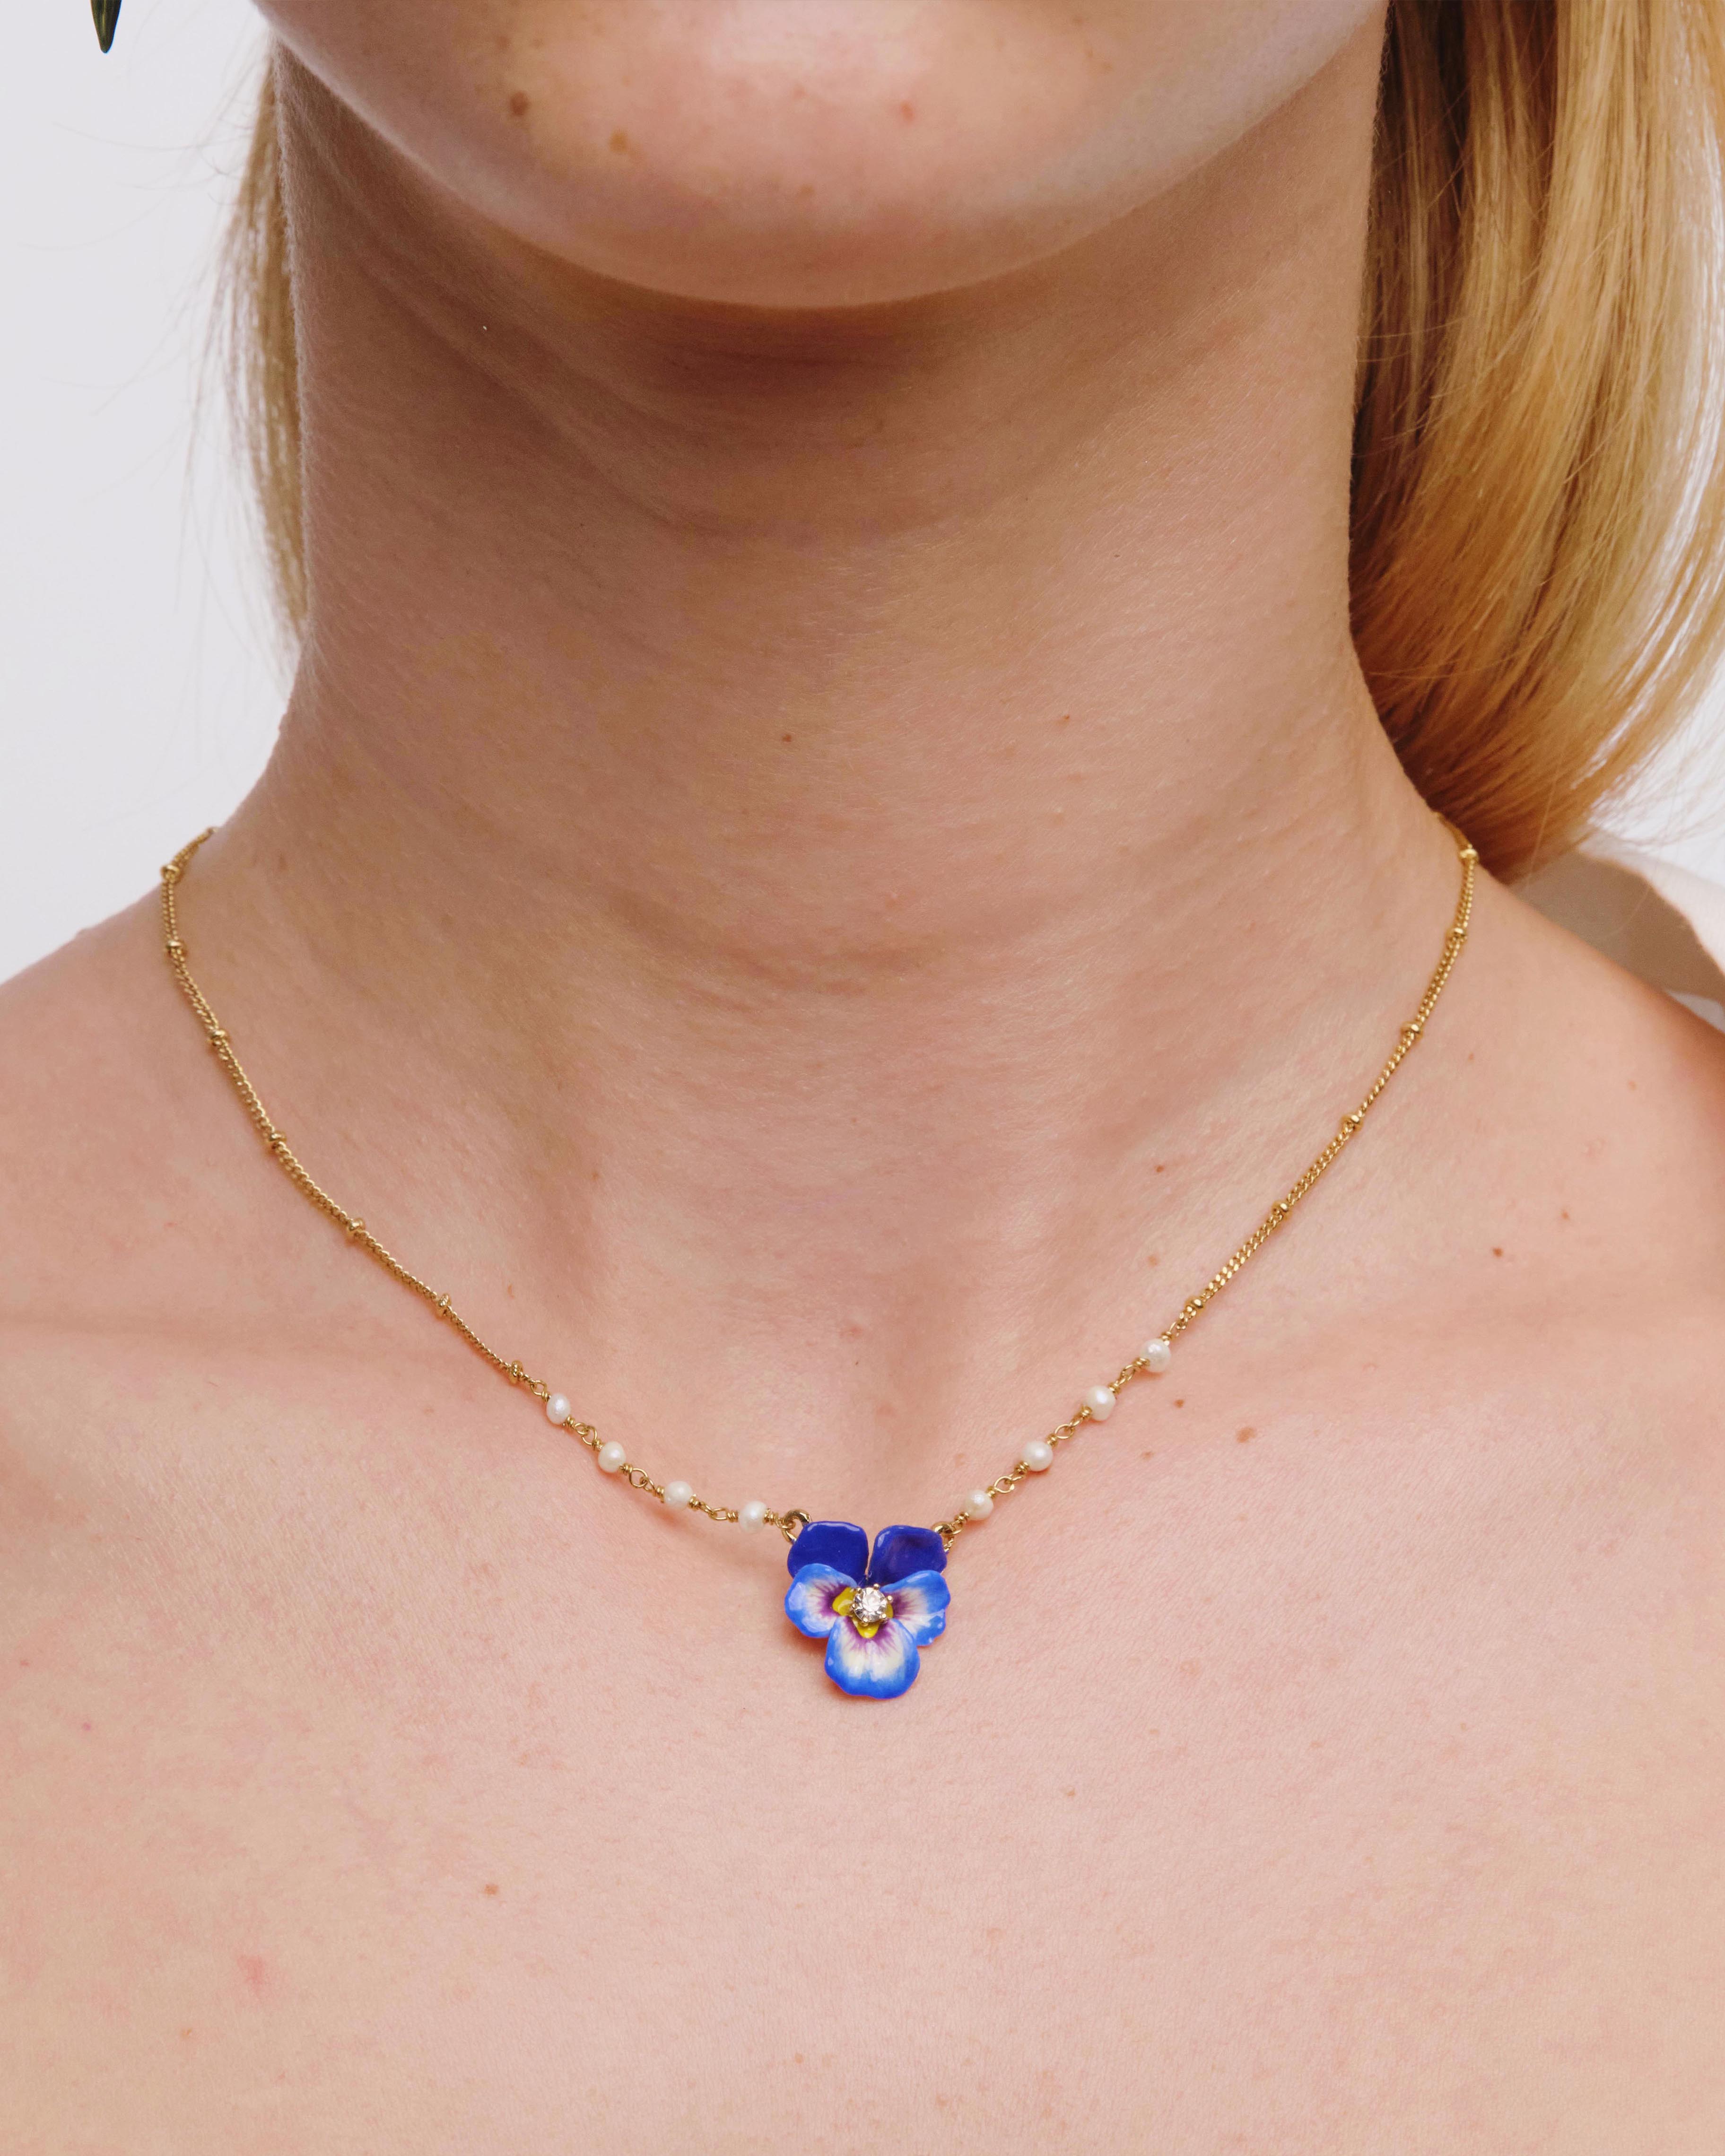 Blue pansy and faceted crystal pendant necklace